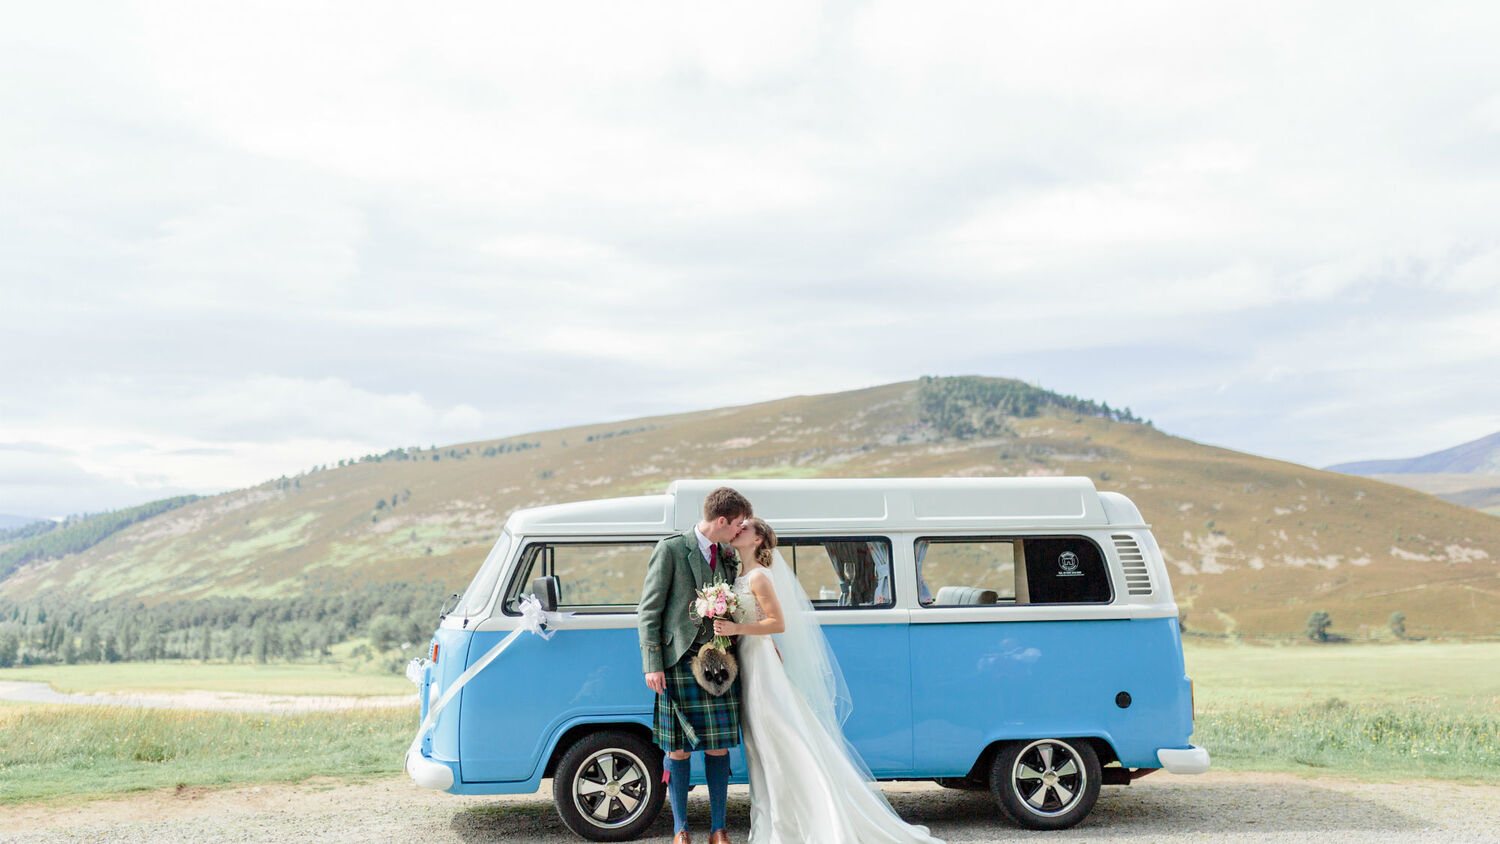 A bride and groom kiss in front of a blue camper van, parked in front of a mountain and moorland.